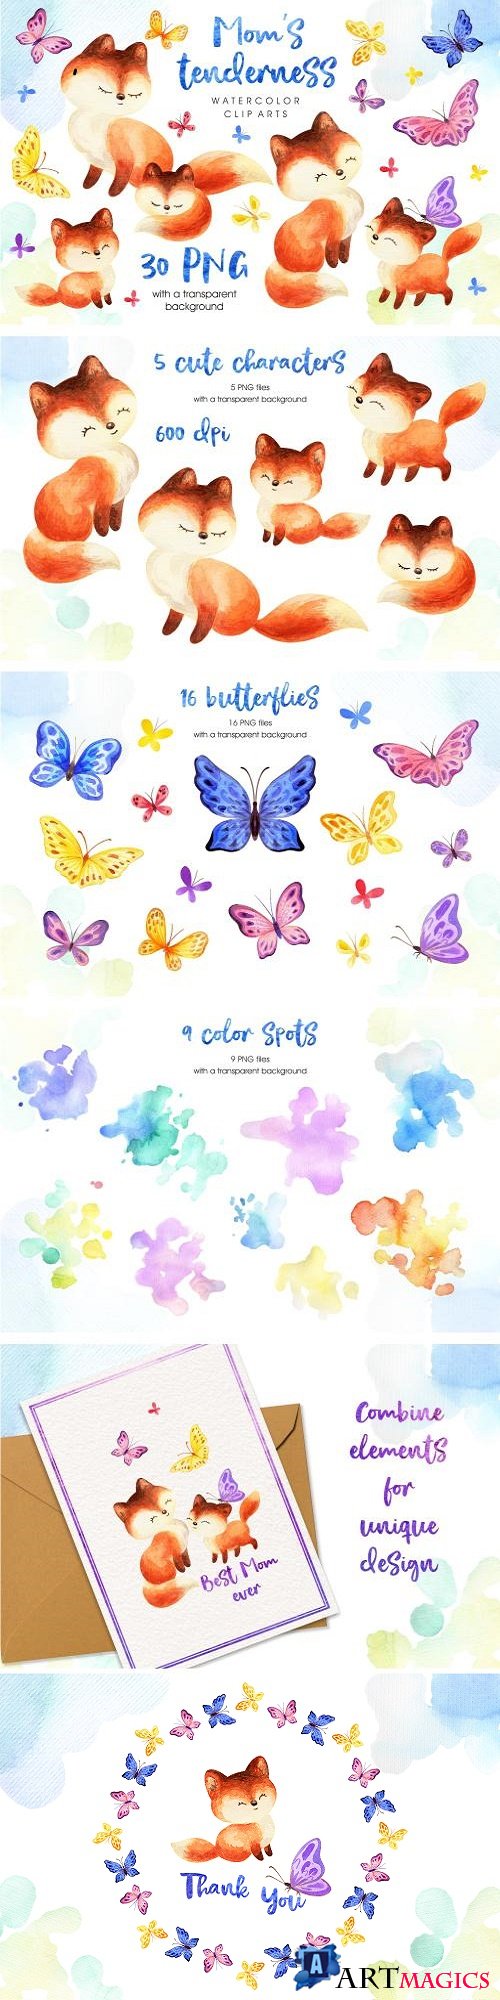 Mom's tenderness. Watercolor foxes and butterflies 242862